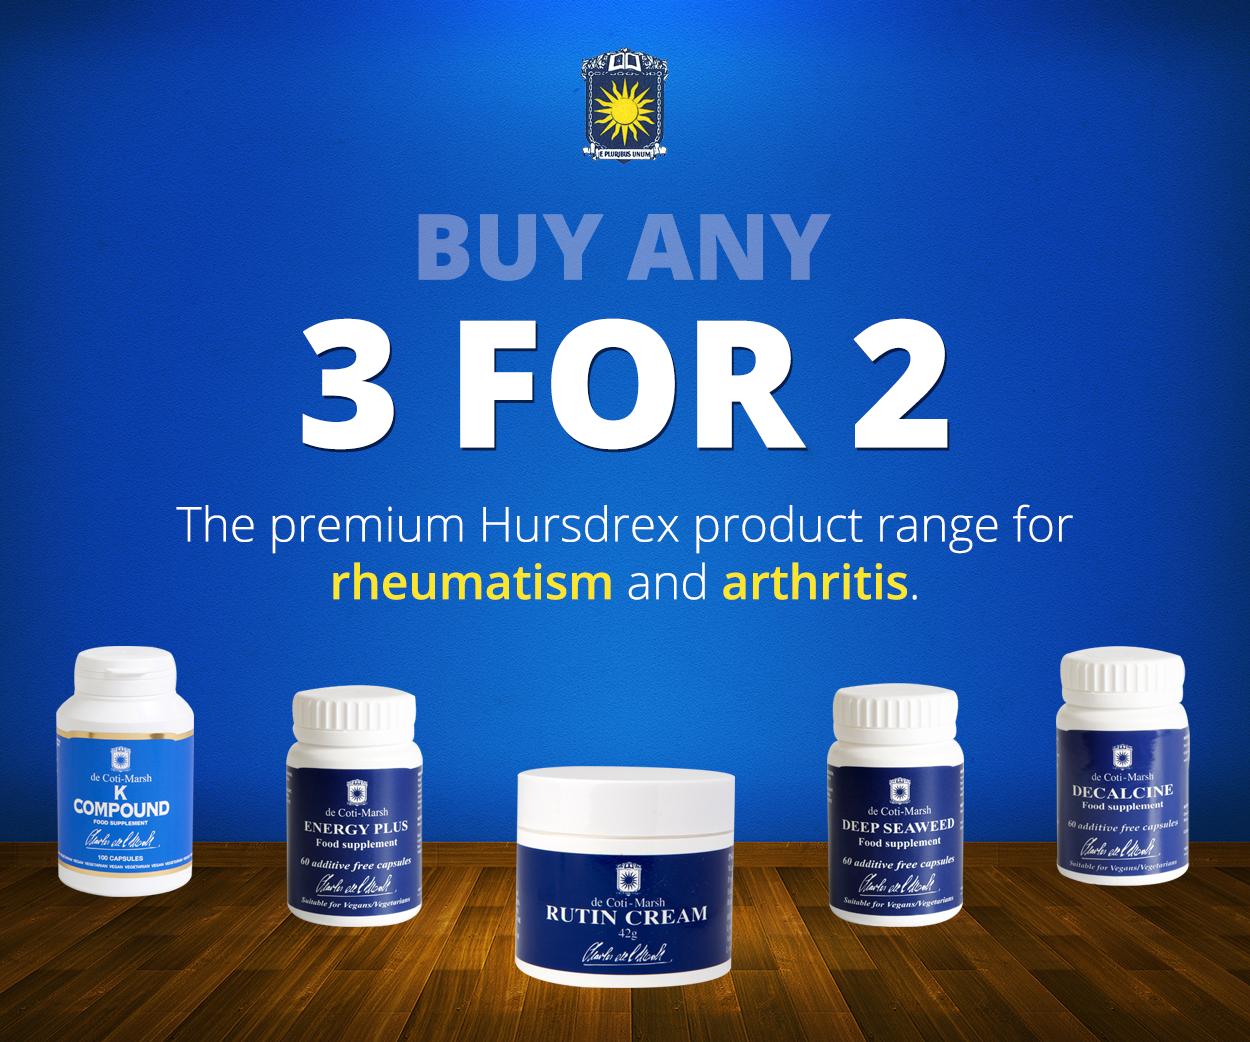 Cursed Insignificant Mentality Bio Health on Twitter: "Buy 3 for 2 offer on Charles de Coti-Marsh products  starts now! Hursdrex is a premium range of special food supplements for  rheumatism and arthritis. To view &amp;